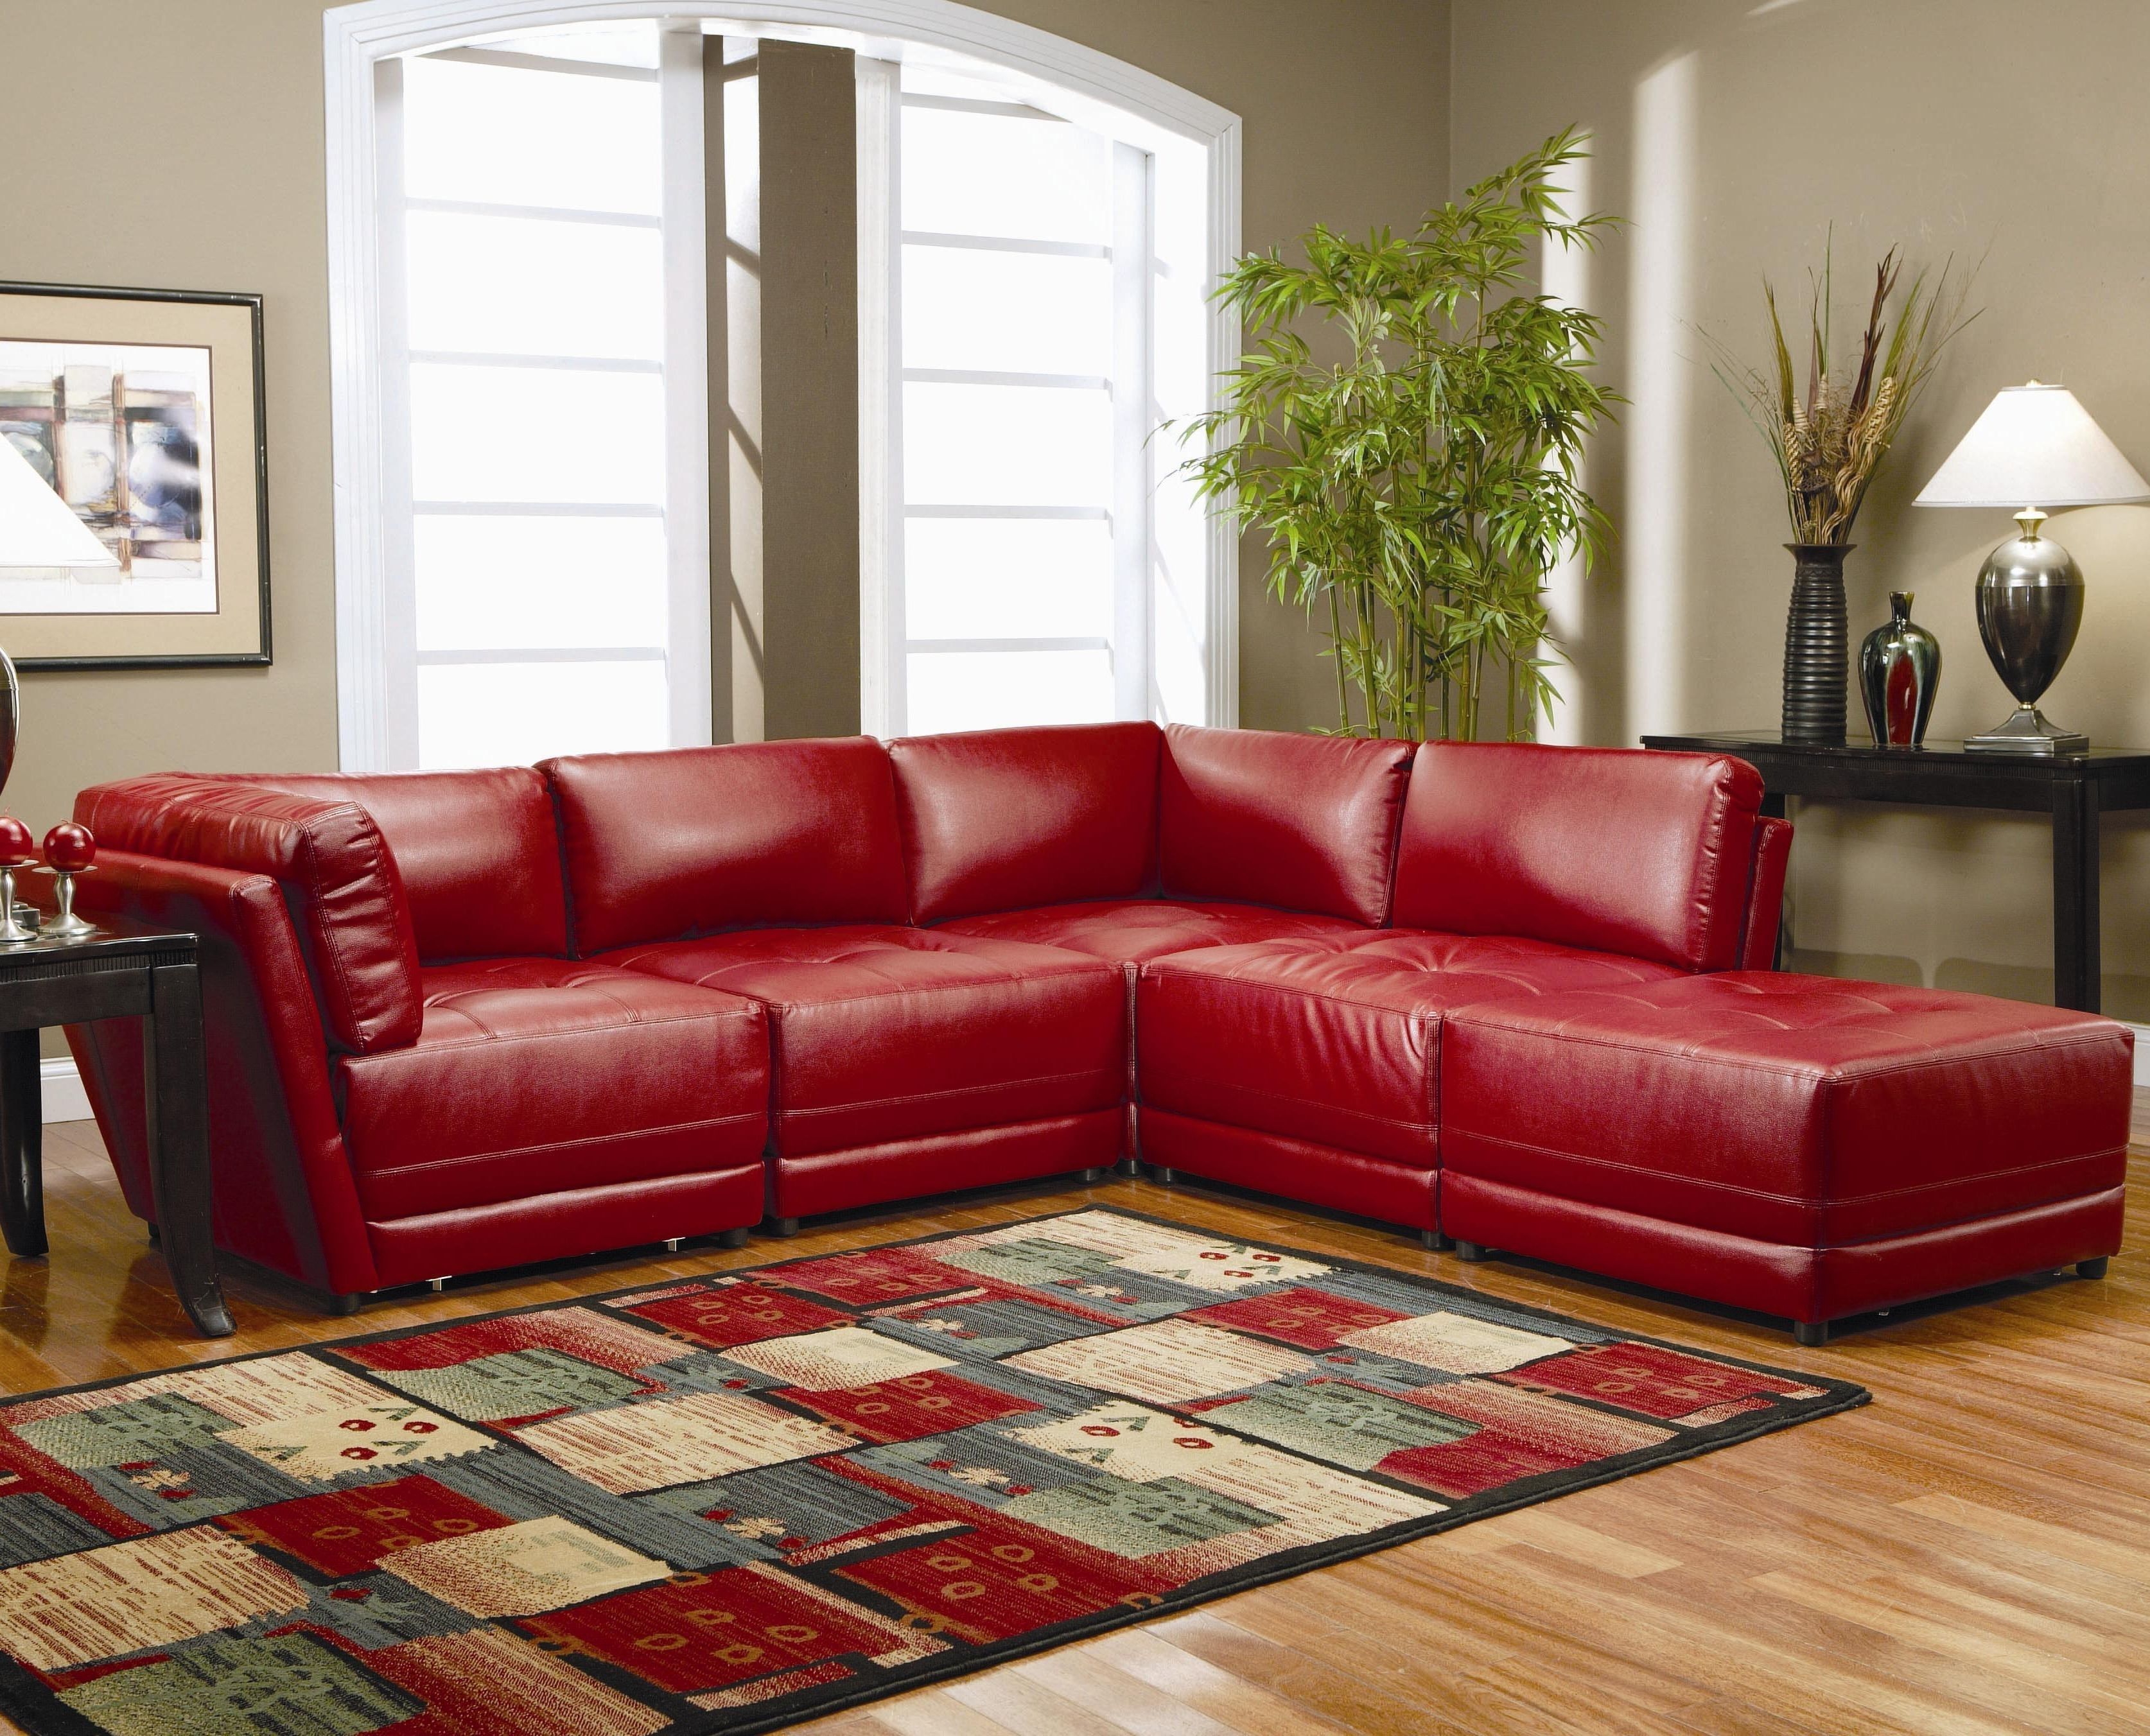 Red Leather Sectional Sofa Sale – Hotelsbacau In Red Leather Sectional Couches (View 6 of 15)